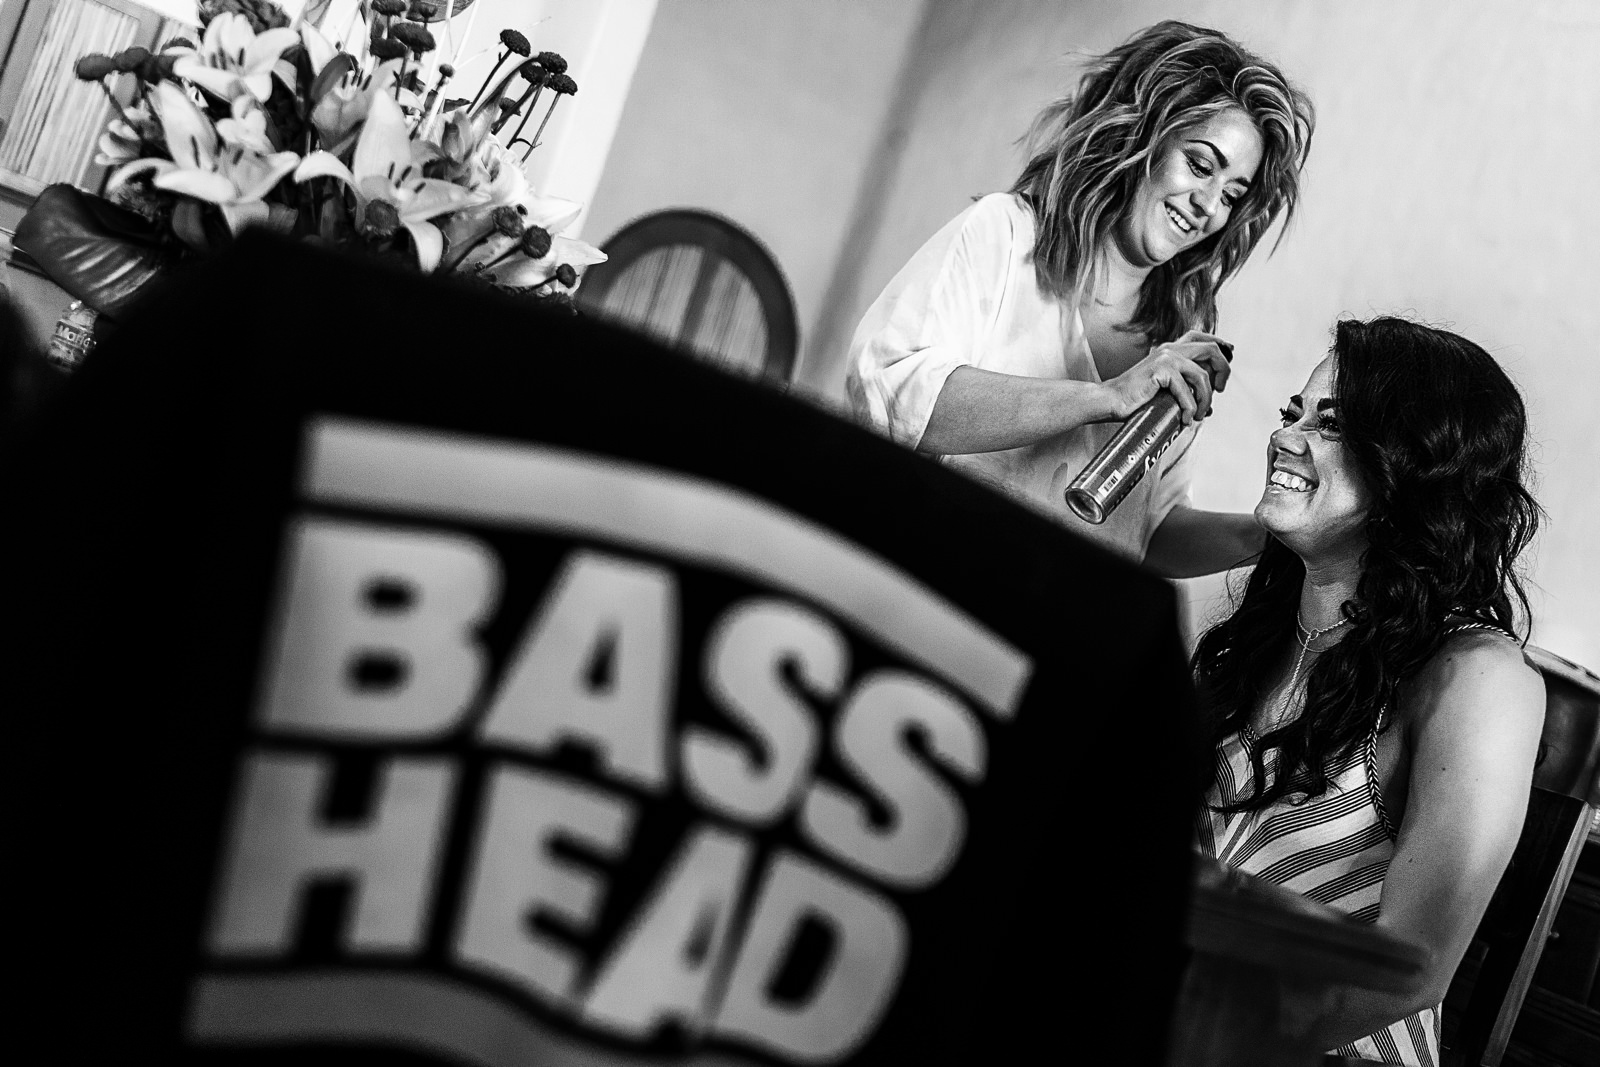 Two girls getting ready for a wedding and sharing a laugh, a BASS HEAD T-shirt is hanged over a chair in the foreground